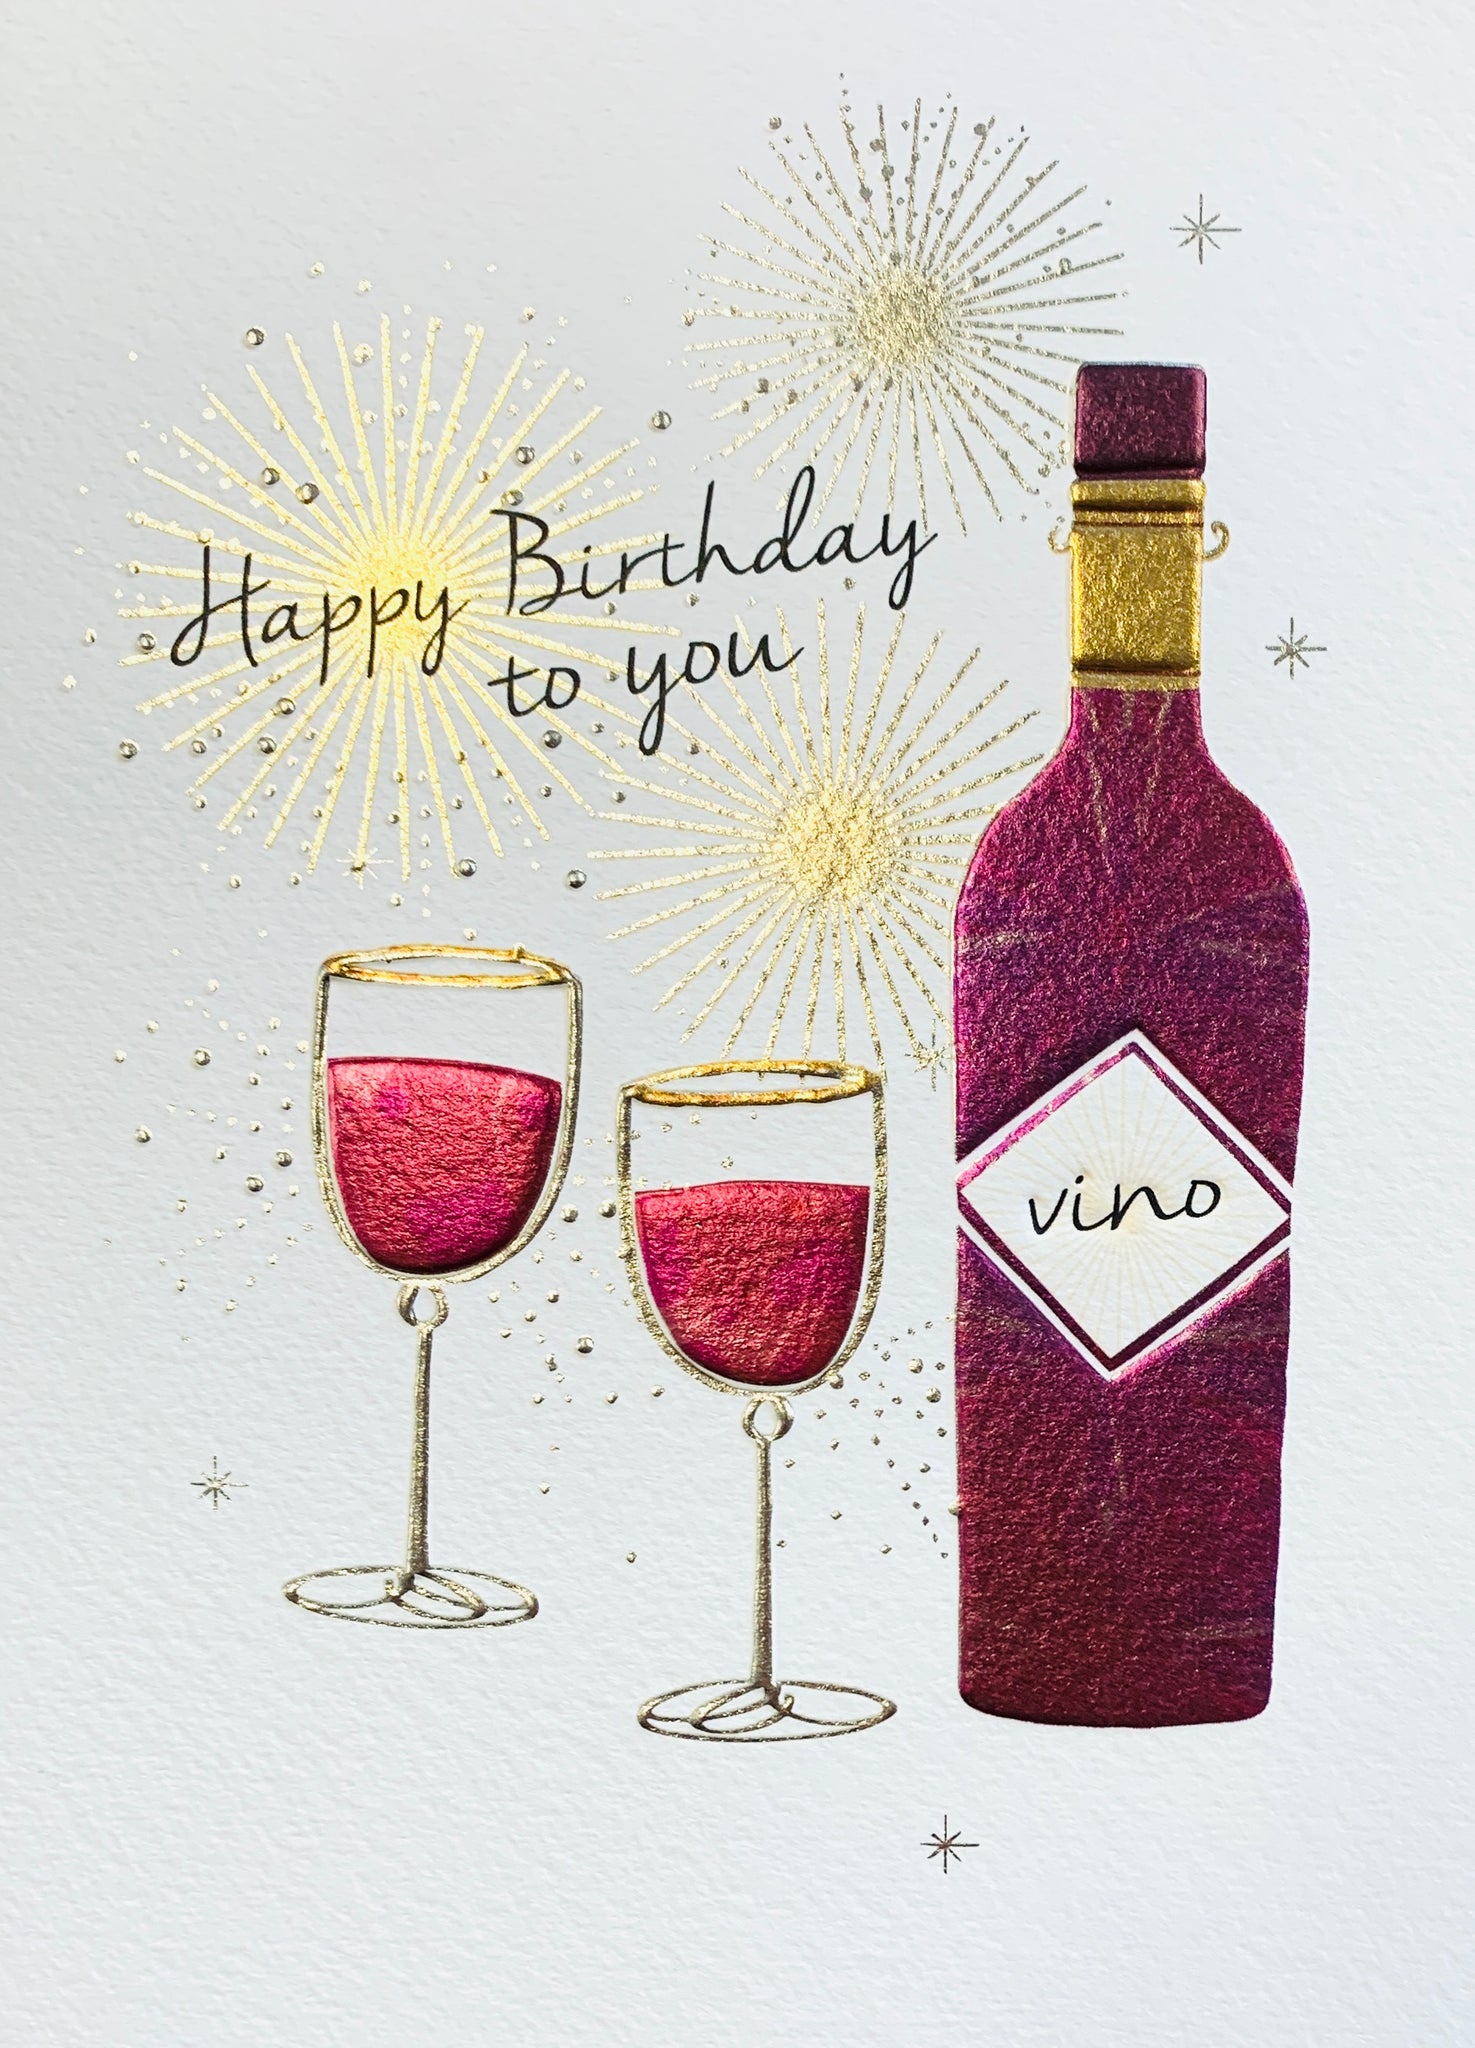 General birthday card for her- wine